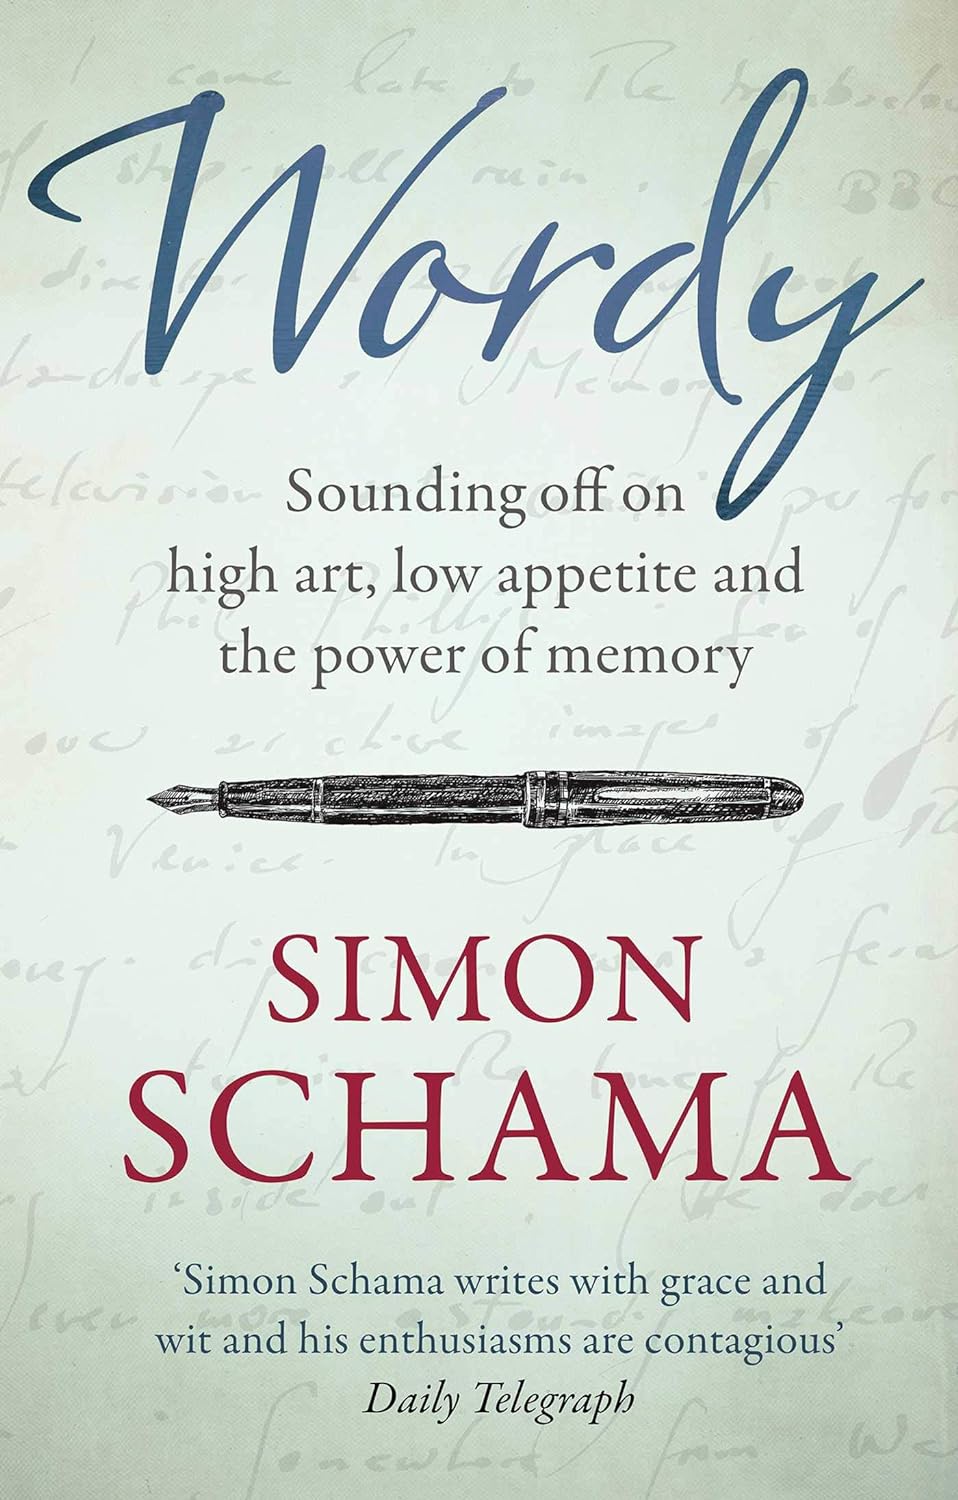 Book cover: "Wordy: Sounding Off on High Art, Low Appetite and the Power of Memory."